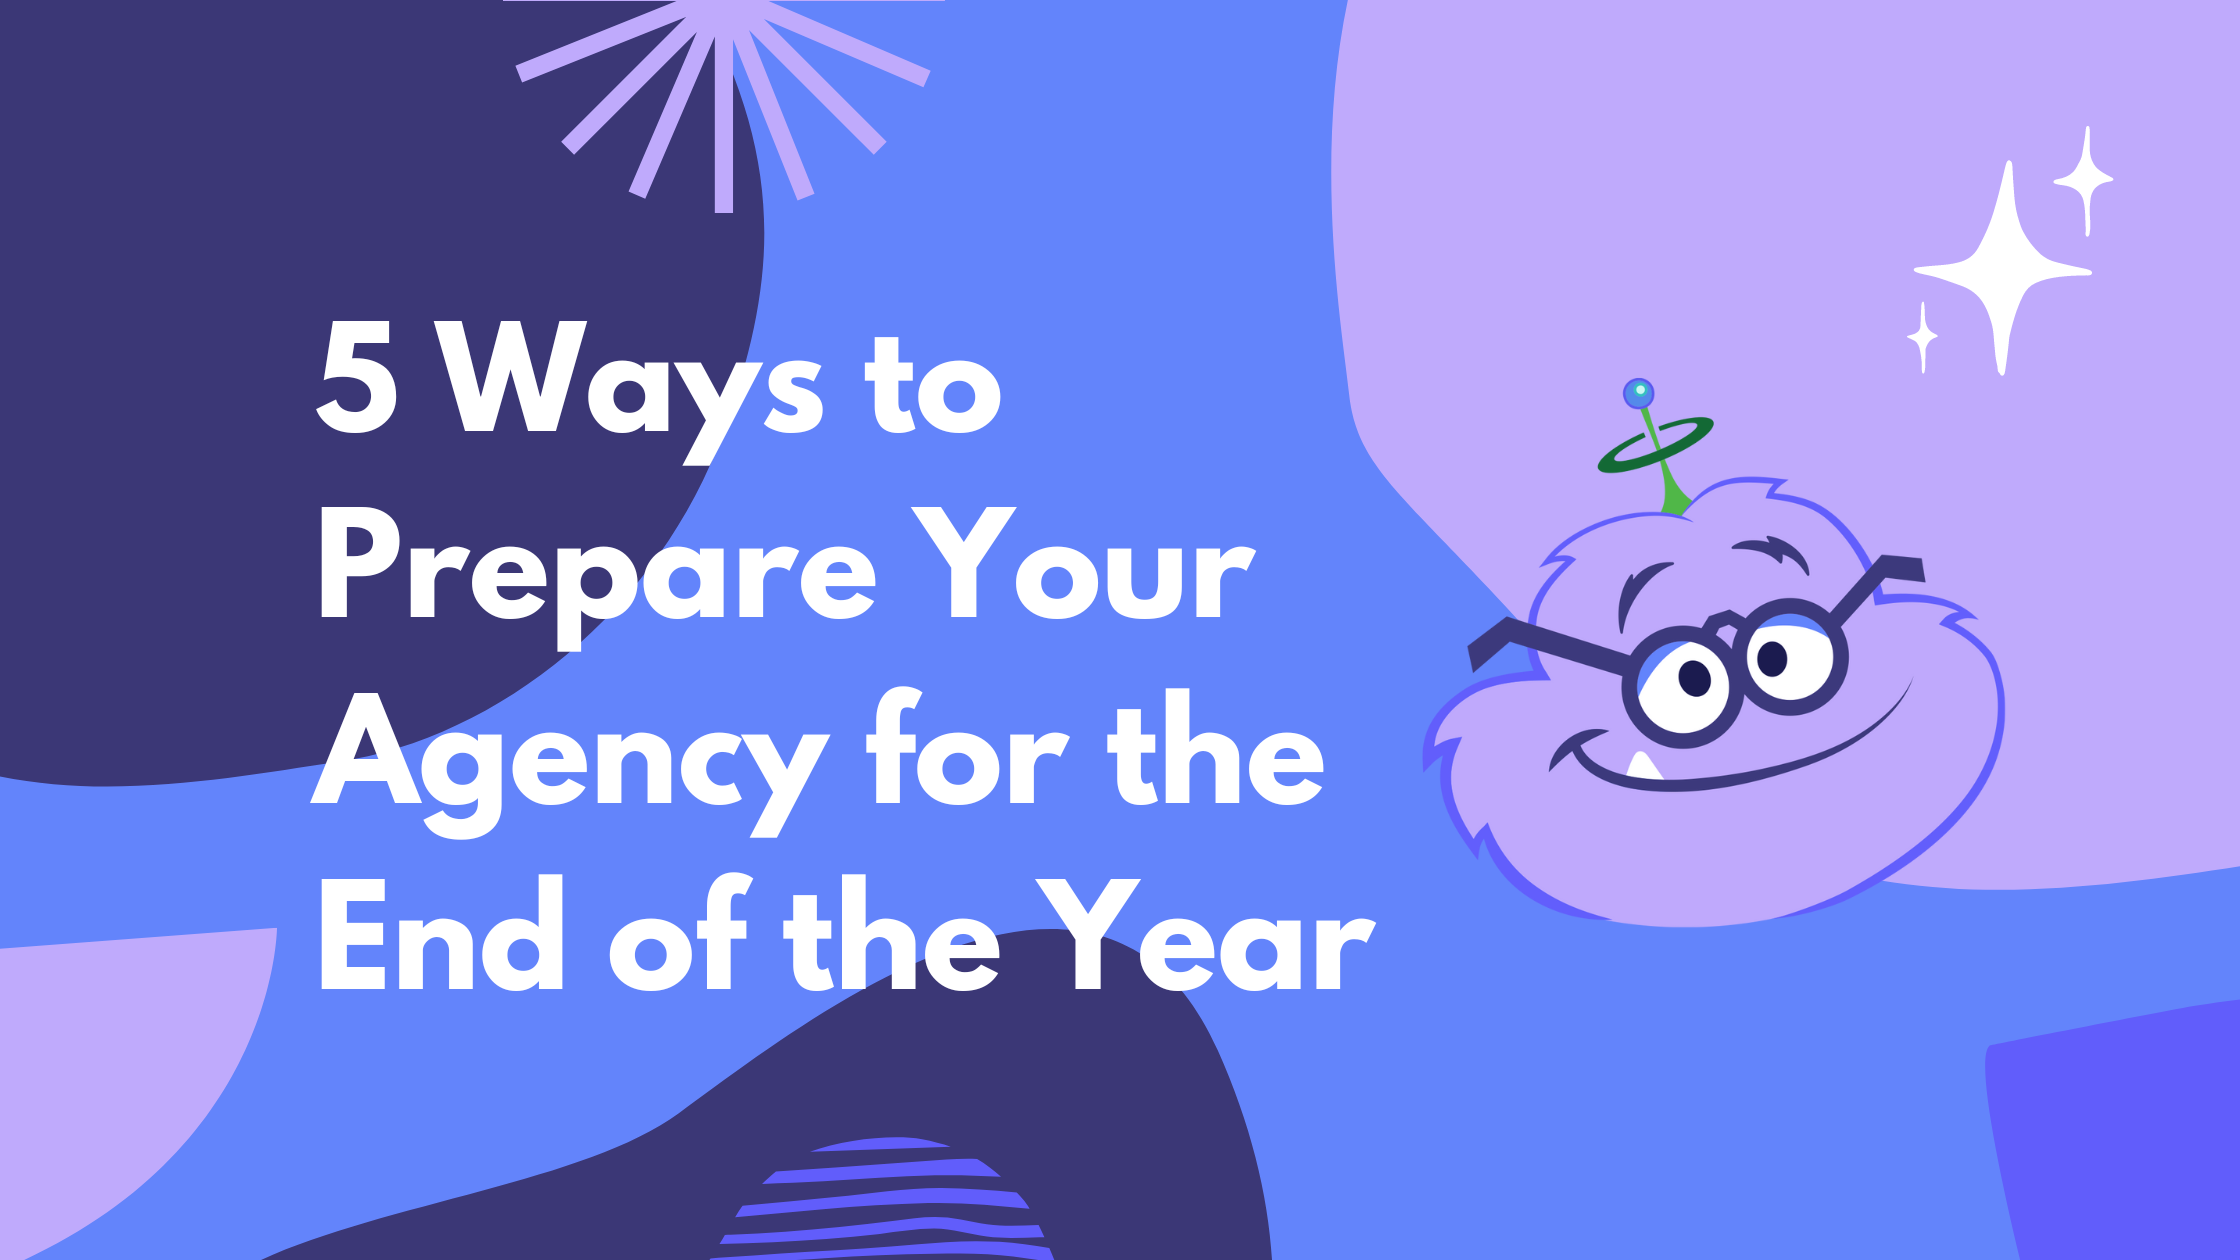 5 Ways to Prepare Your Agency for the End of the Year